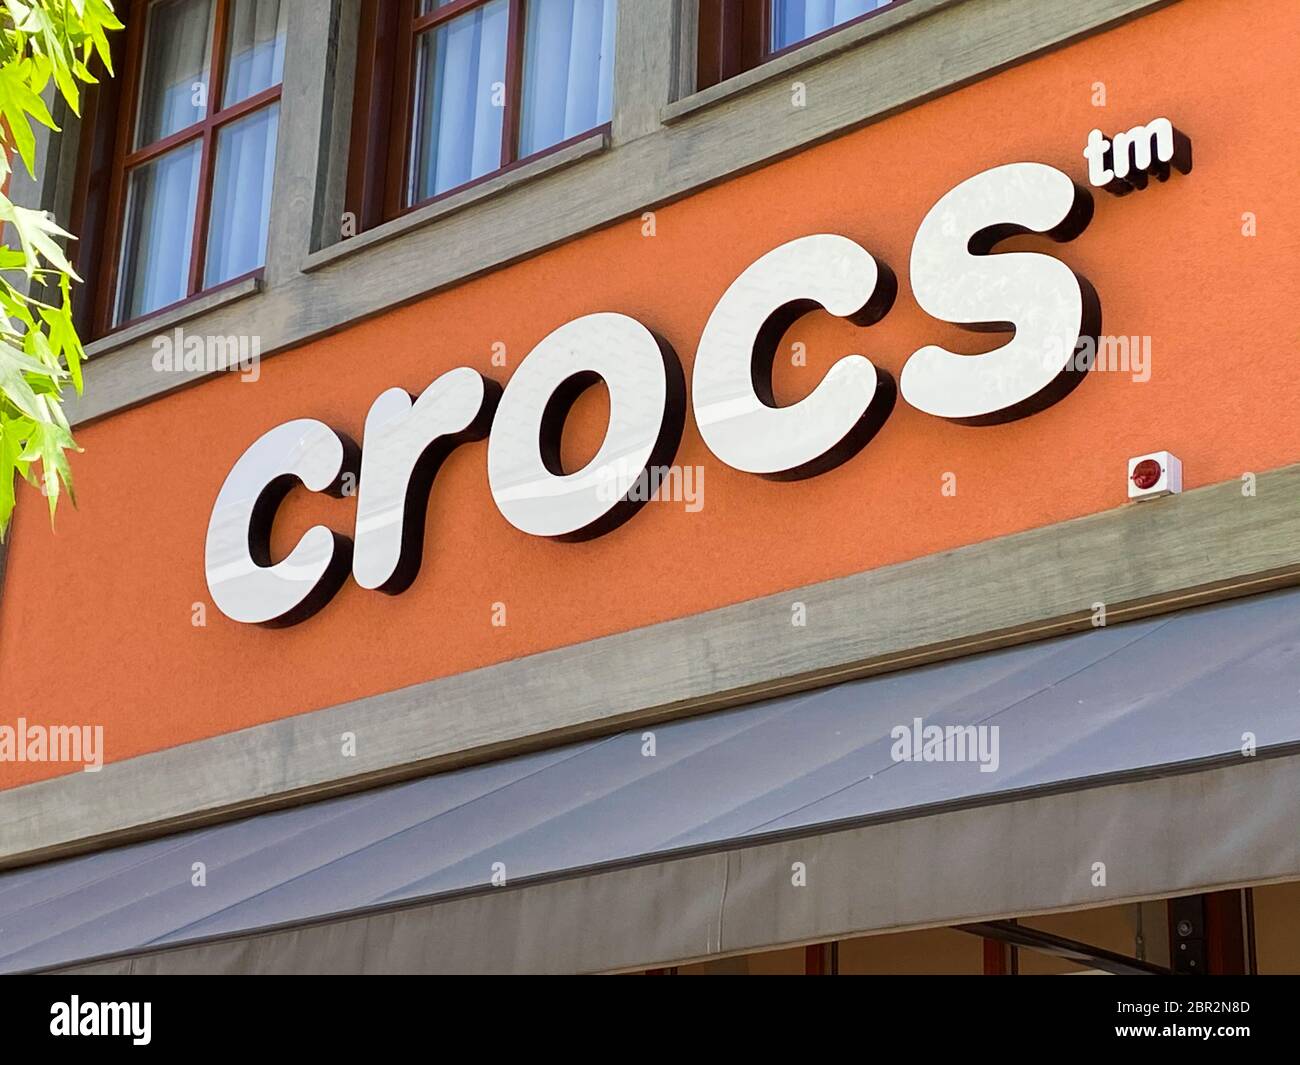 Roermond, Netherlands - May 19. 2020: View on facade with logo lettering of  Crocs shoes fashion company at shop entrance Stock Photo - Alamy